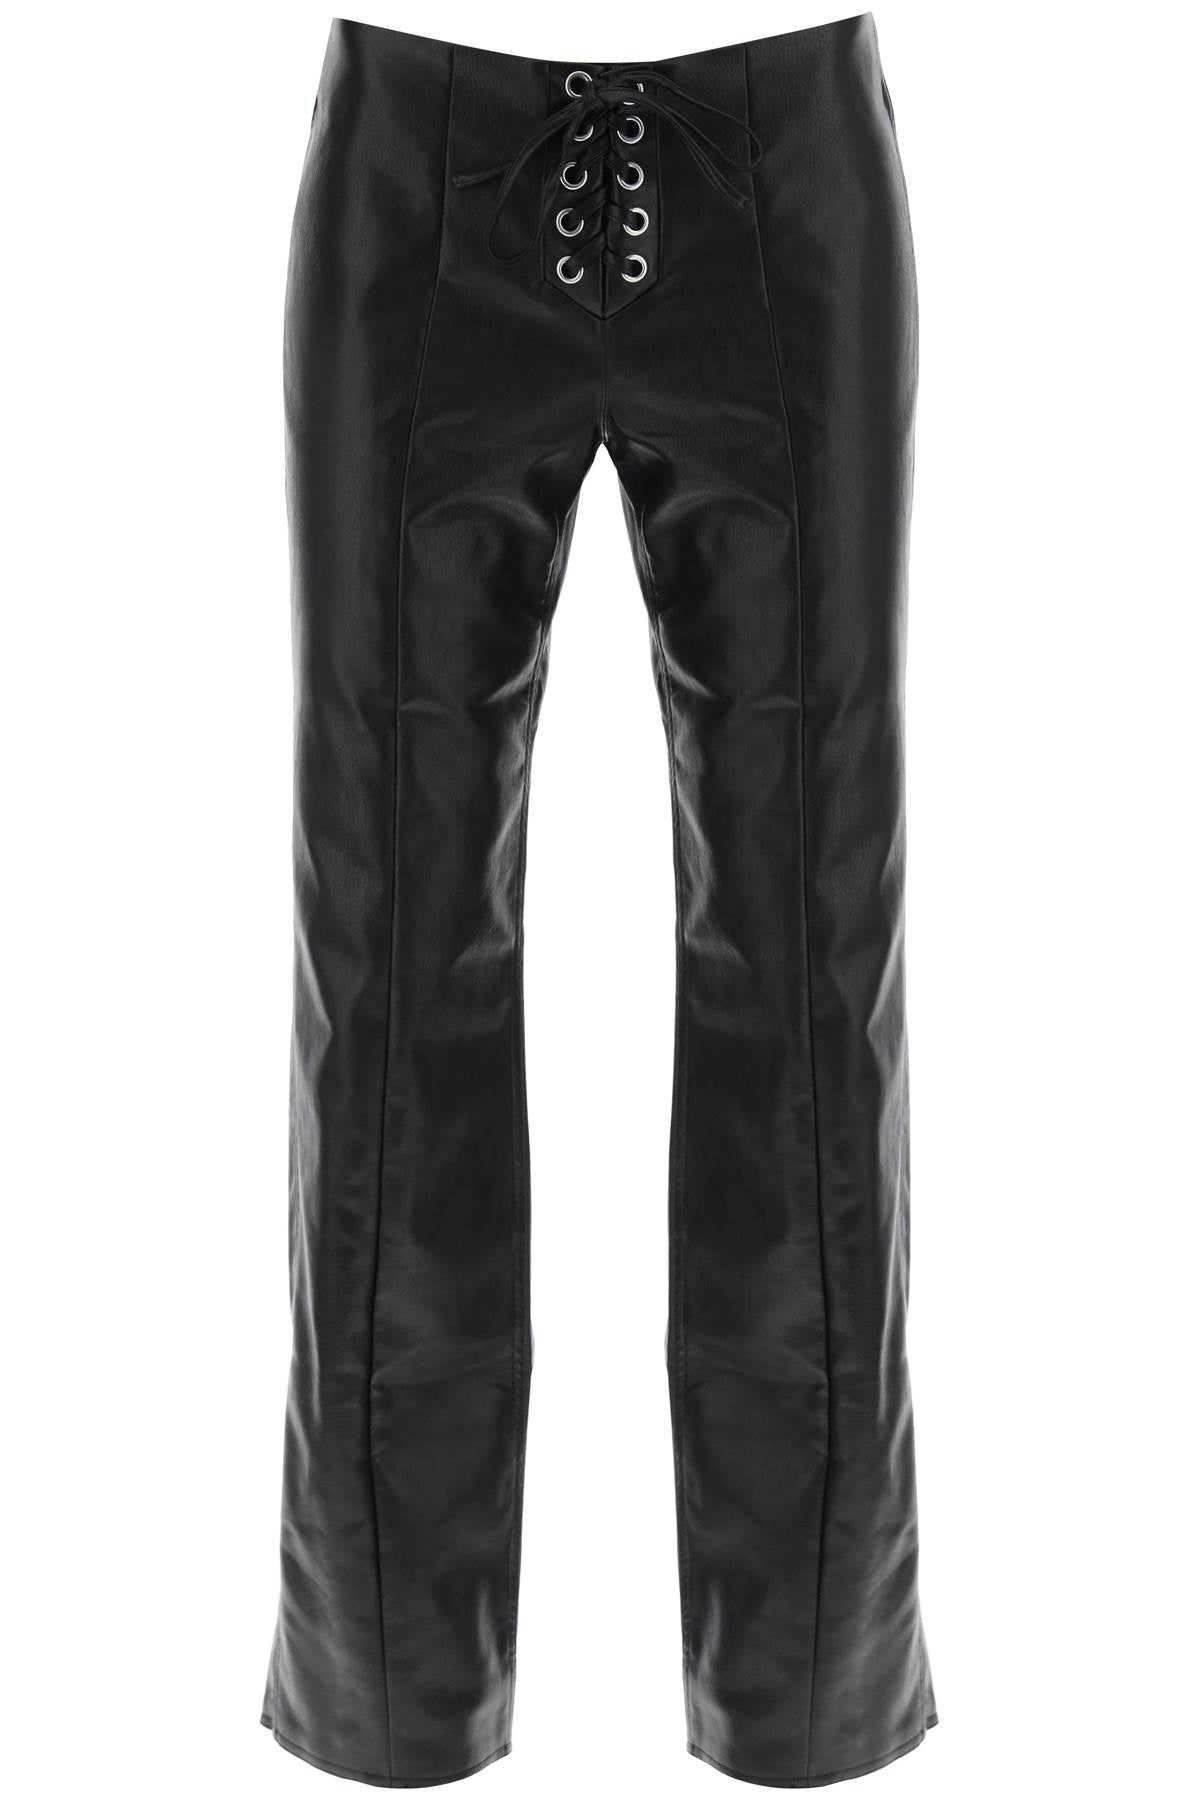 Rotate straight-cut pants in faux leather 111486100 BLACK